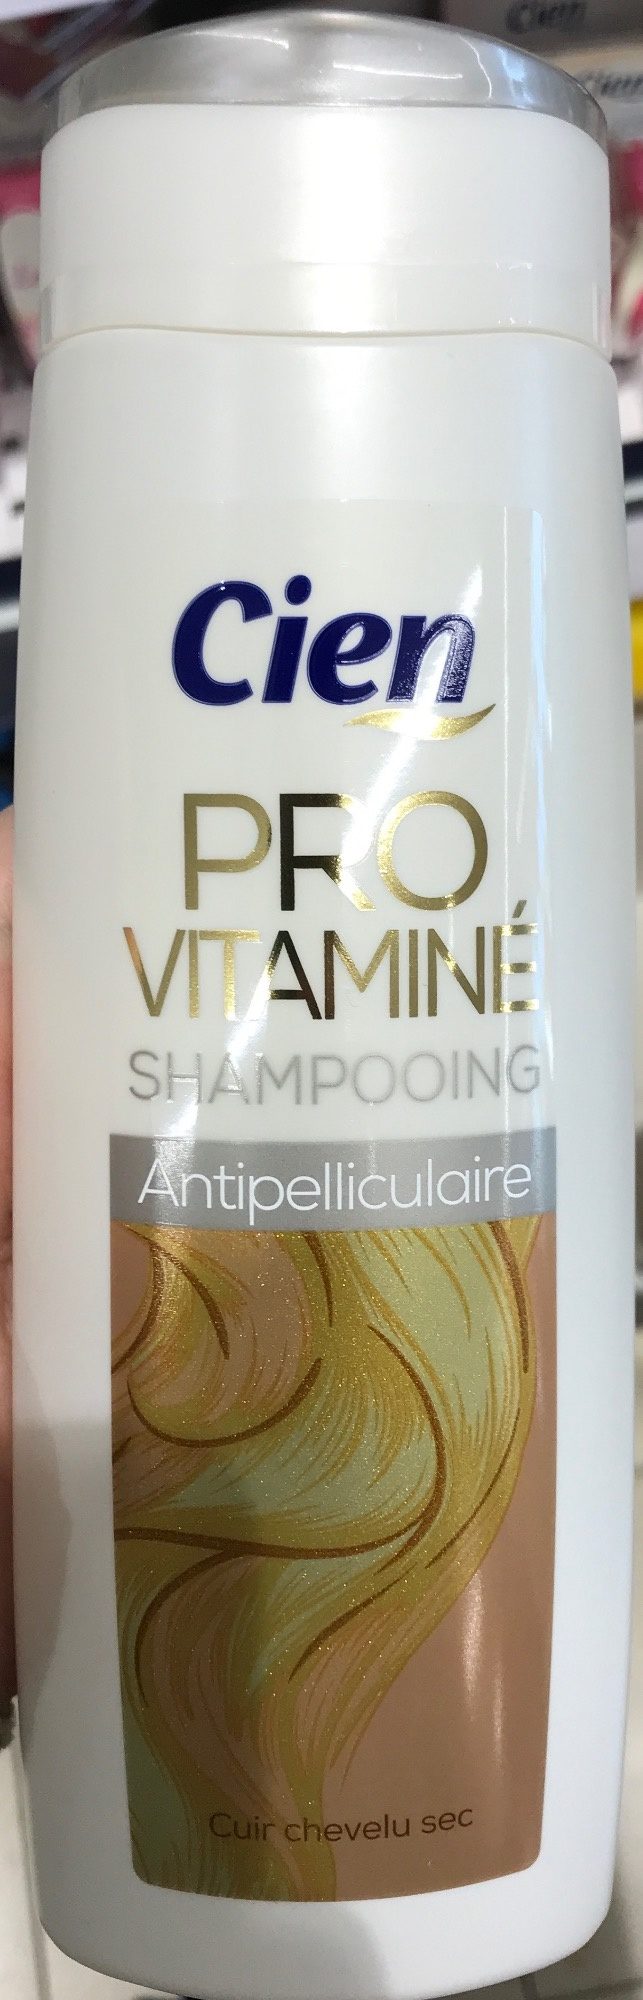 Provitaminé Shampooing Antipelliculaire - Produkt - fr